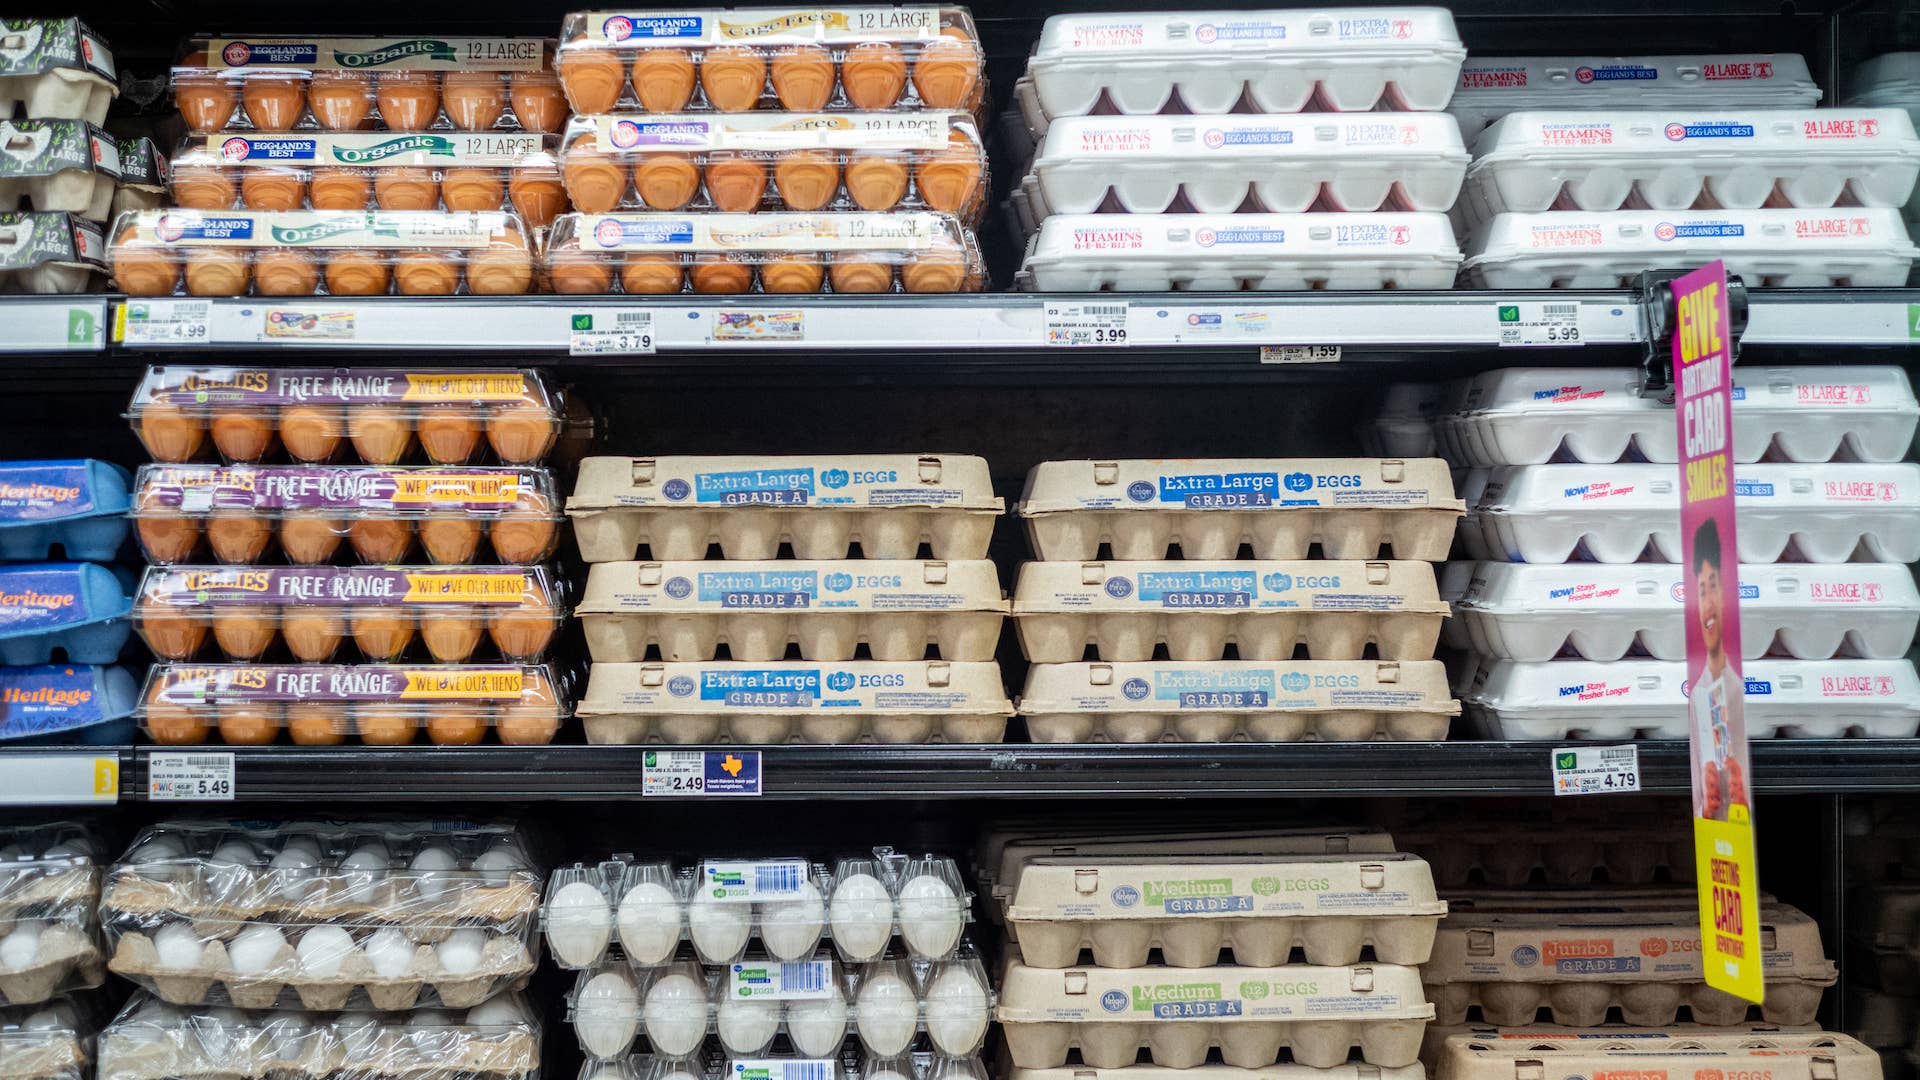 Prices of eggs have skyrocketed in recent months